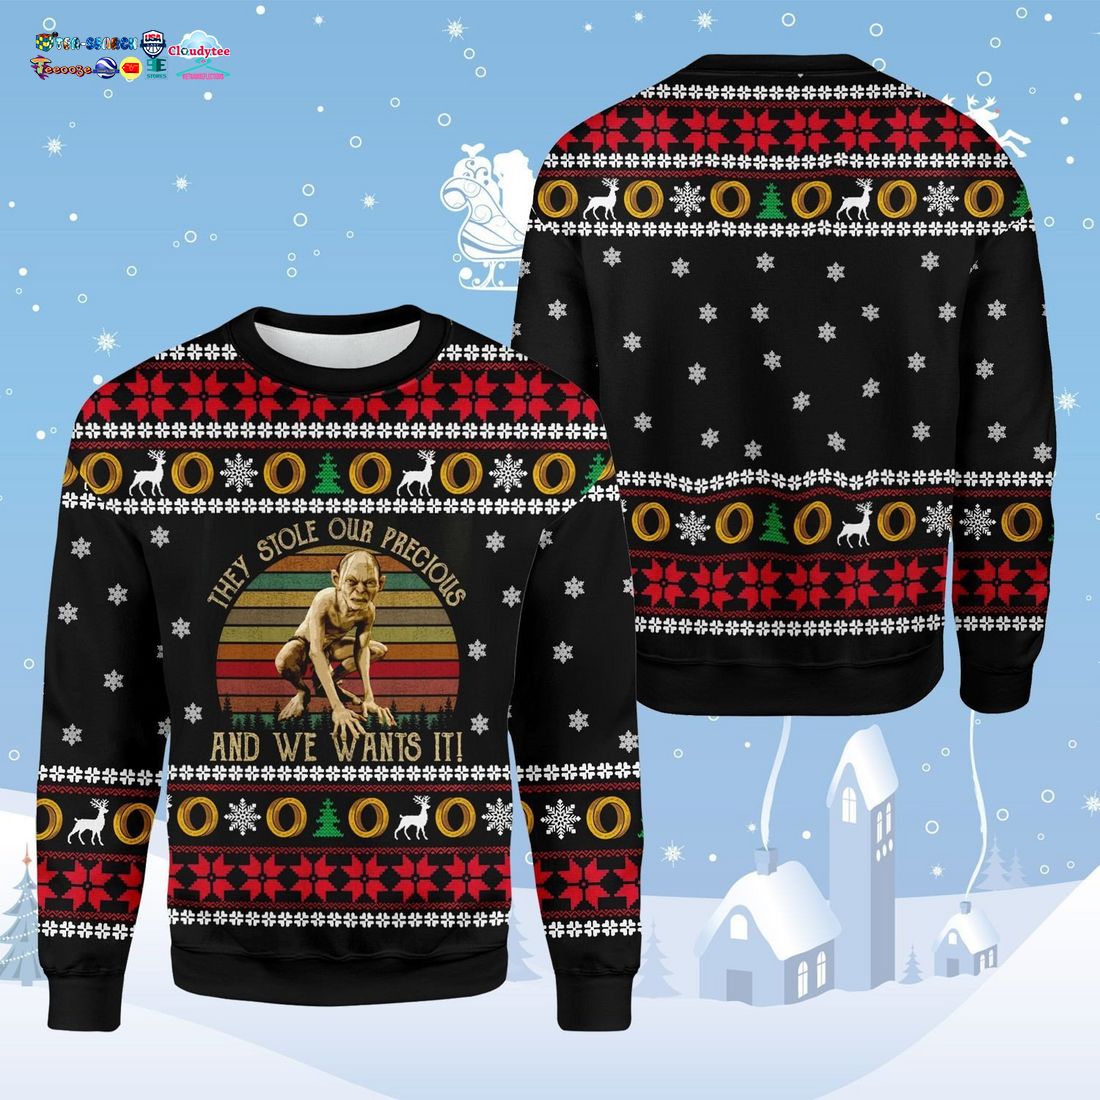 lotr-gollum-they-stole-our-precious-and-we-wants-it-ugly-christmas-sweater-1-O2rtf.jpg